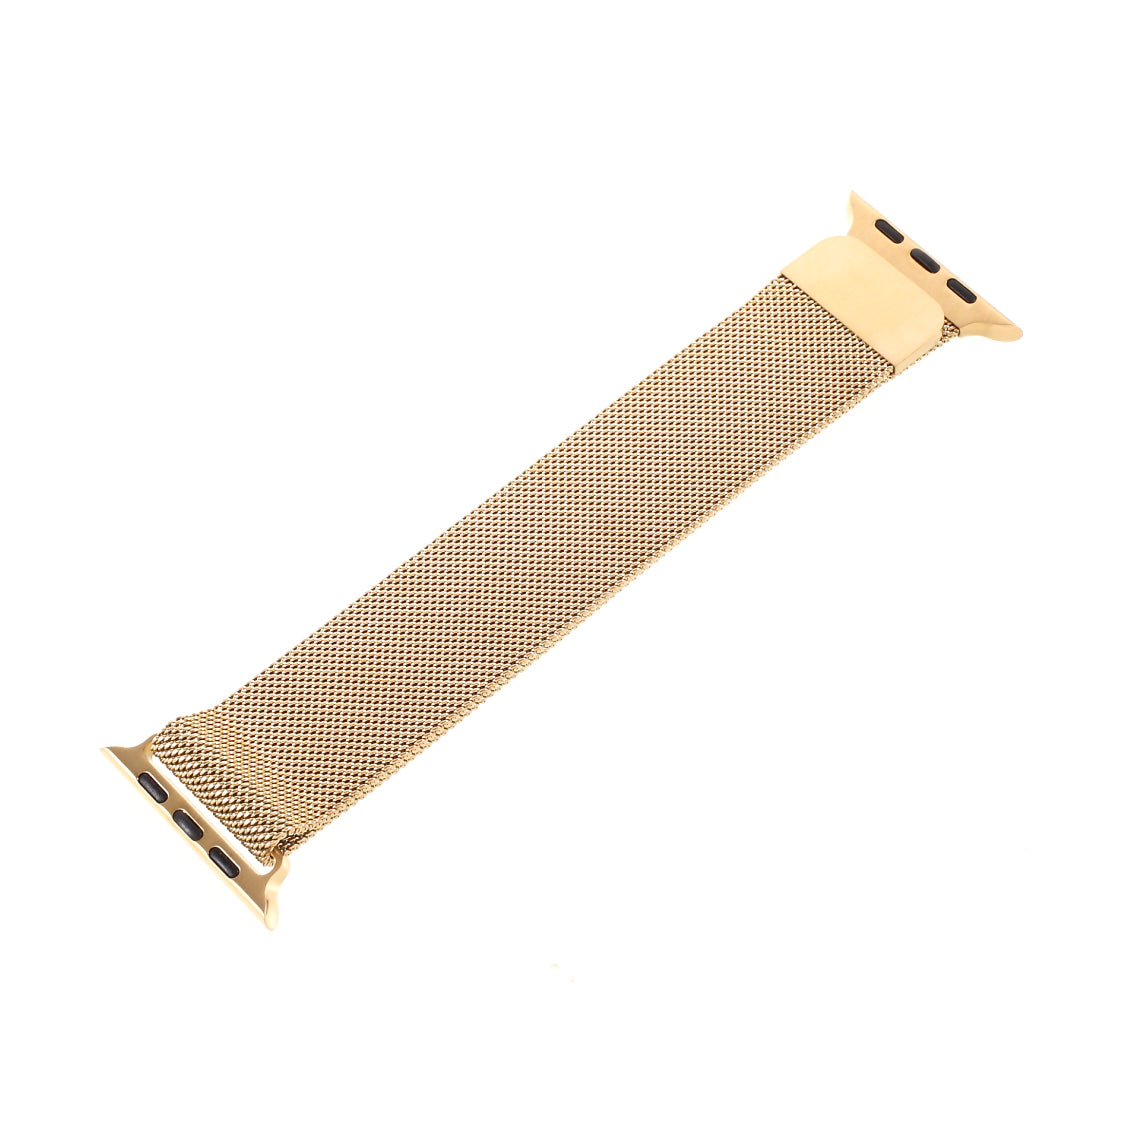 MUTURAL Smart Watch Metal Strap Replacement for Apple Watch Series 1 42mm / 2 42mm / 3 42mm / 4 44mm / 5 44mm / 6 44mm / SE 44mm - Gold